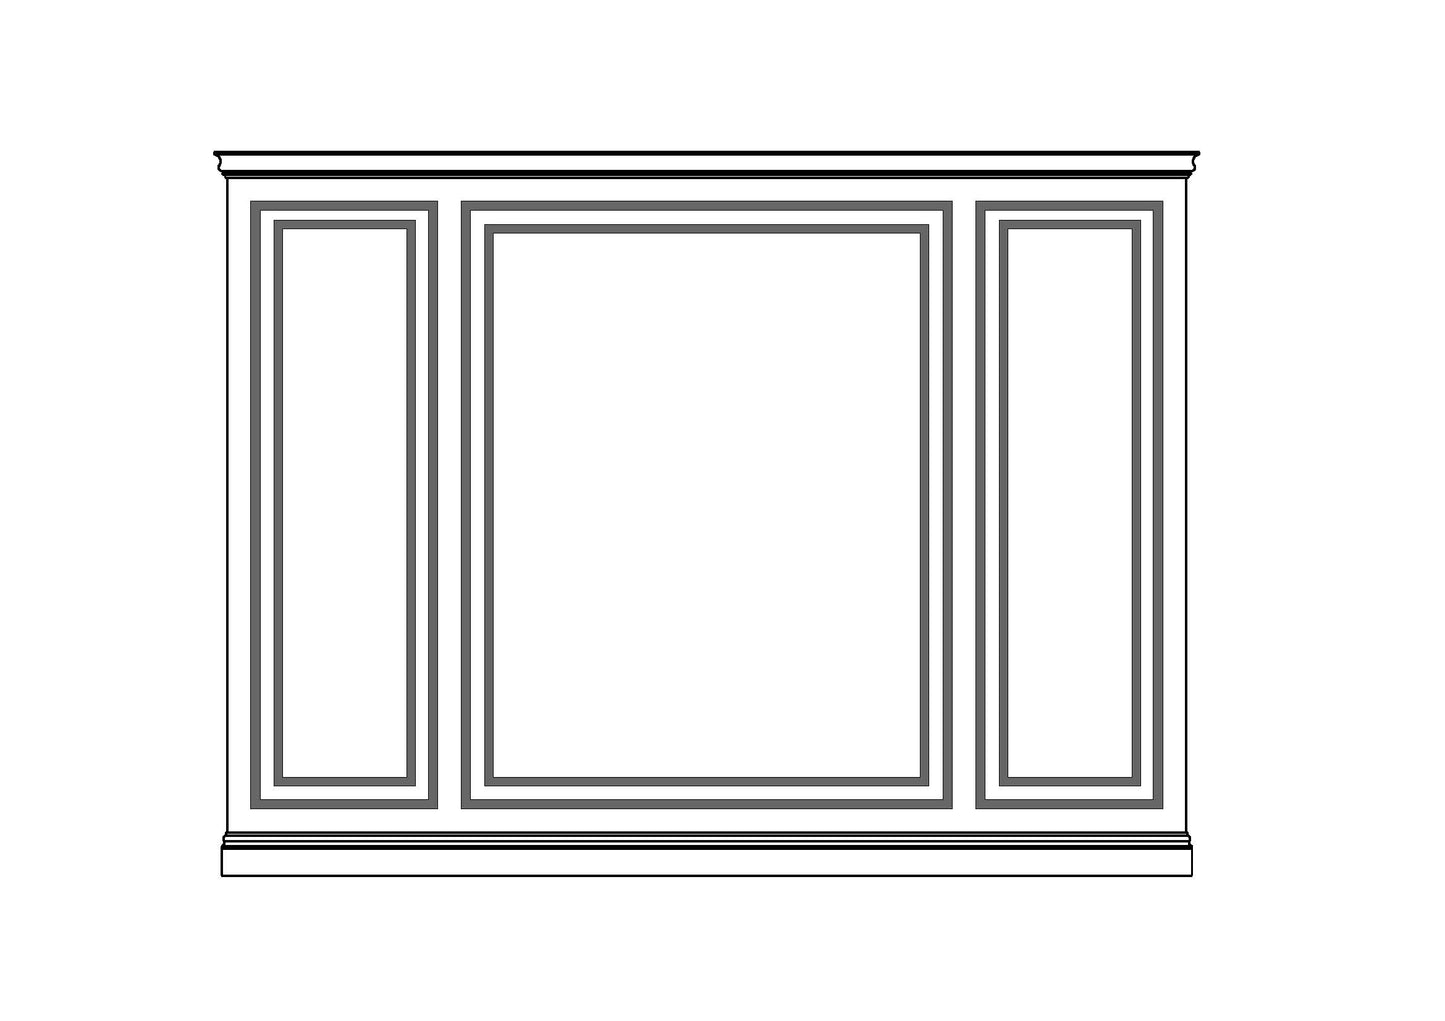 Kit 07B - Manhattan full height double wainscoting - centered layout